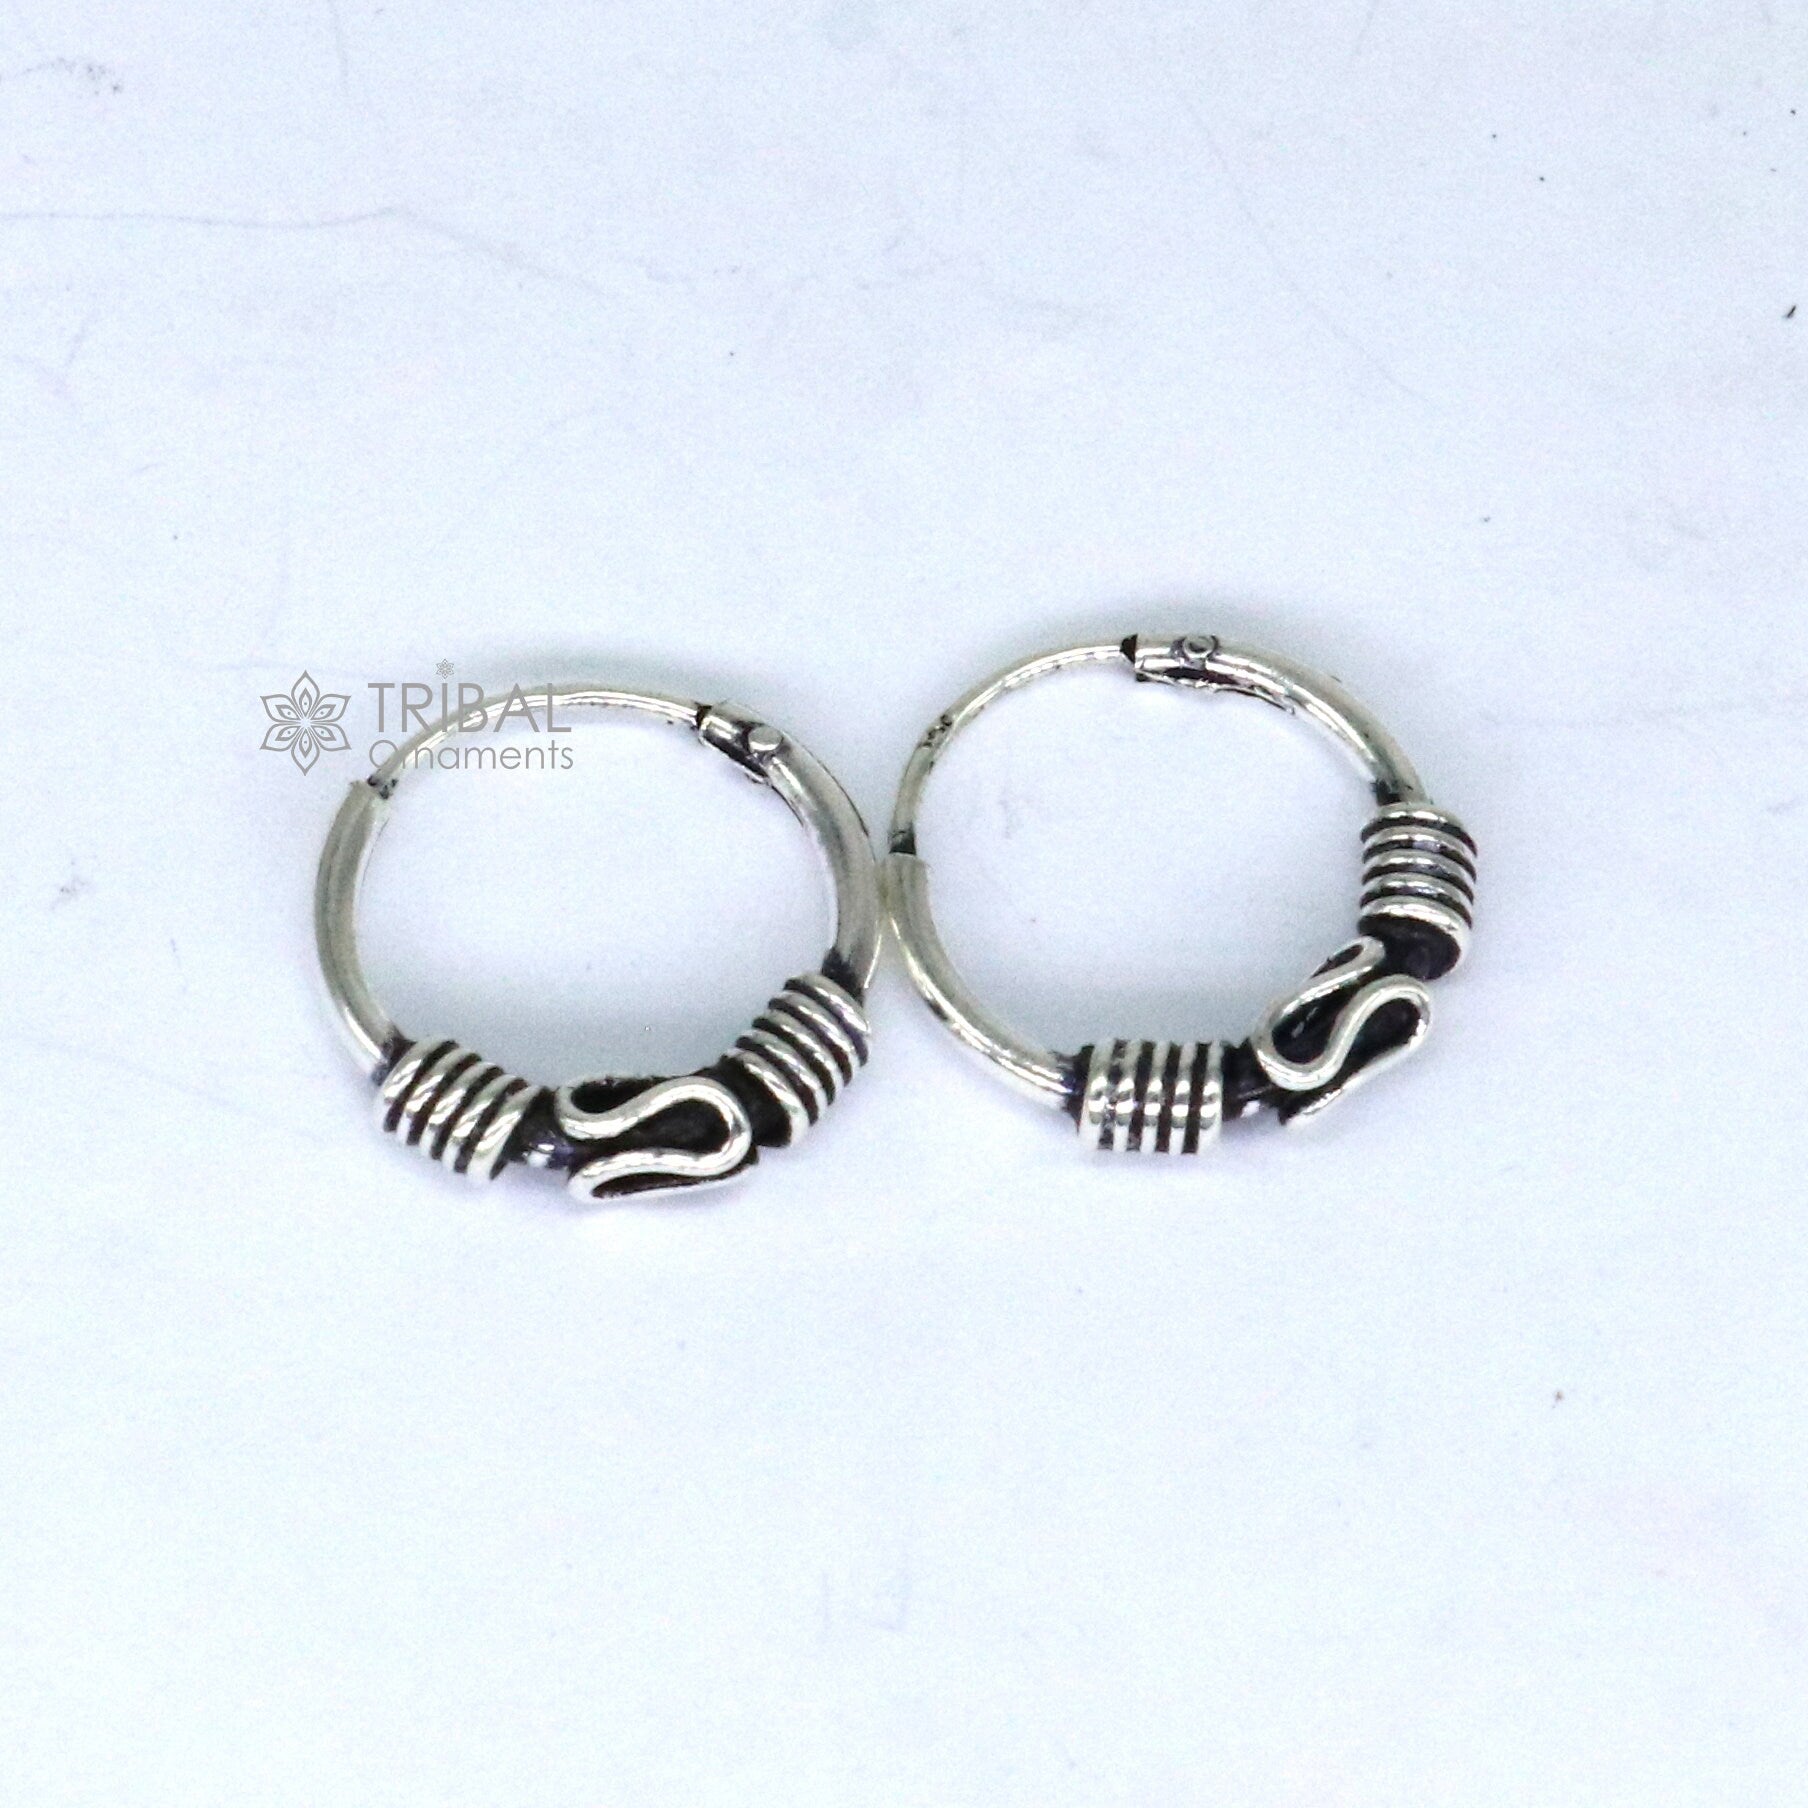 Amazing Cultural new fancy stylish small 925 sterling silver handmade hoops  earrings bali ,pretty gifting bali tribal jewelry india s1217 | TRIBAL  ORNAMENTS